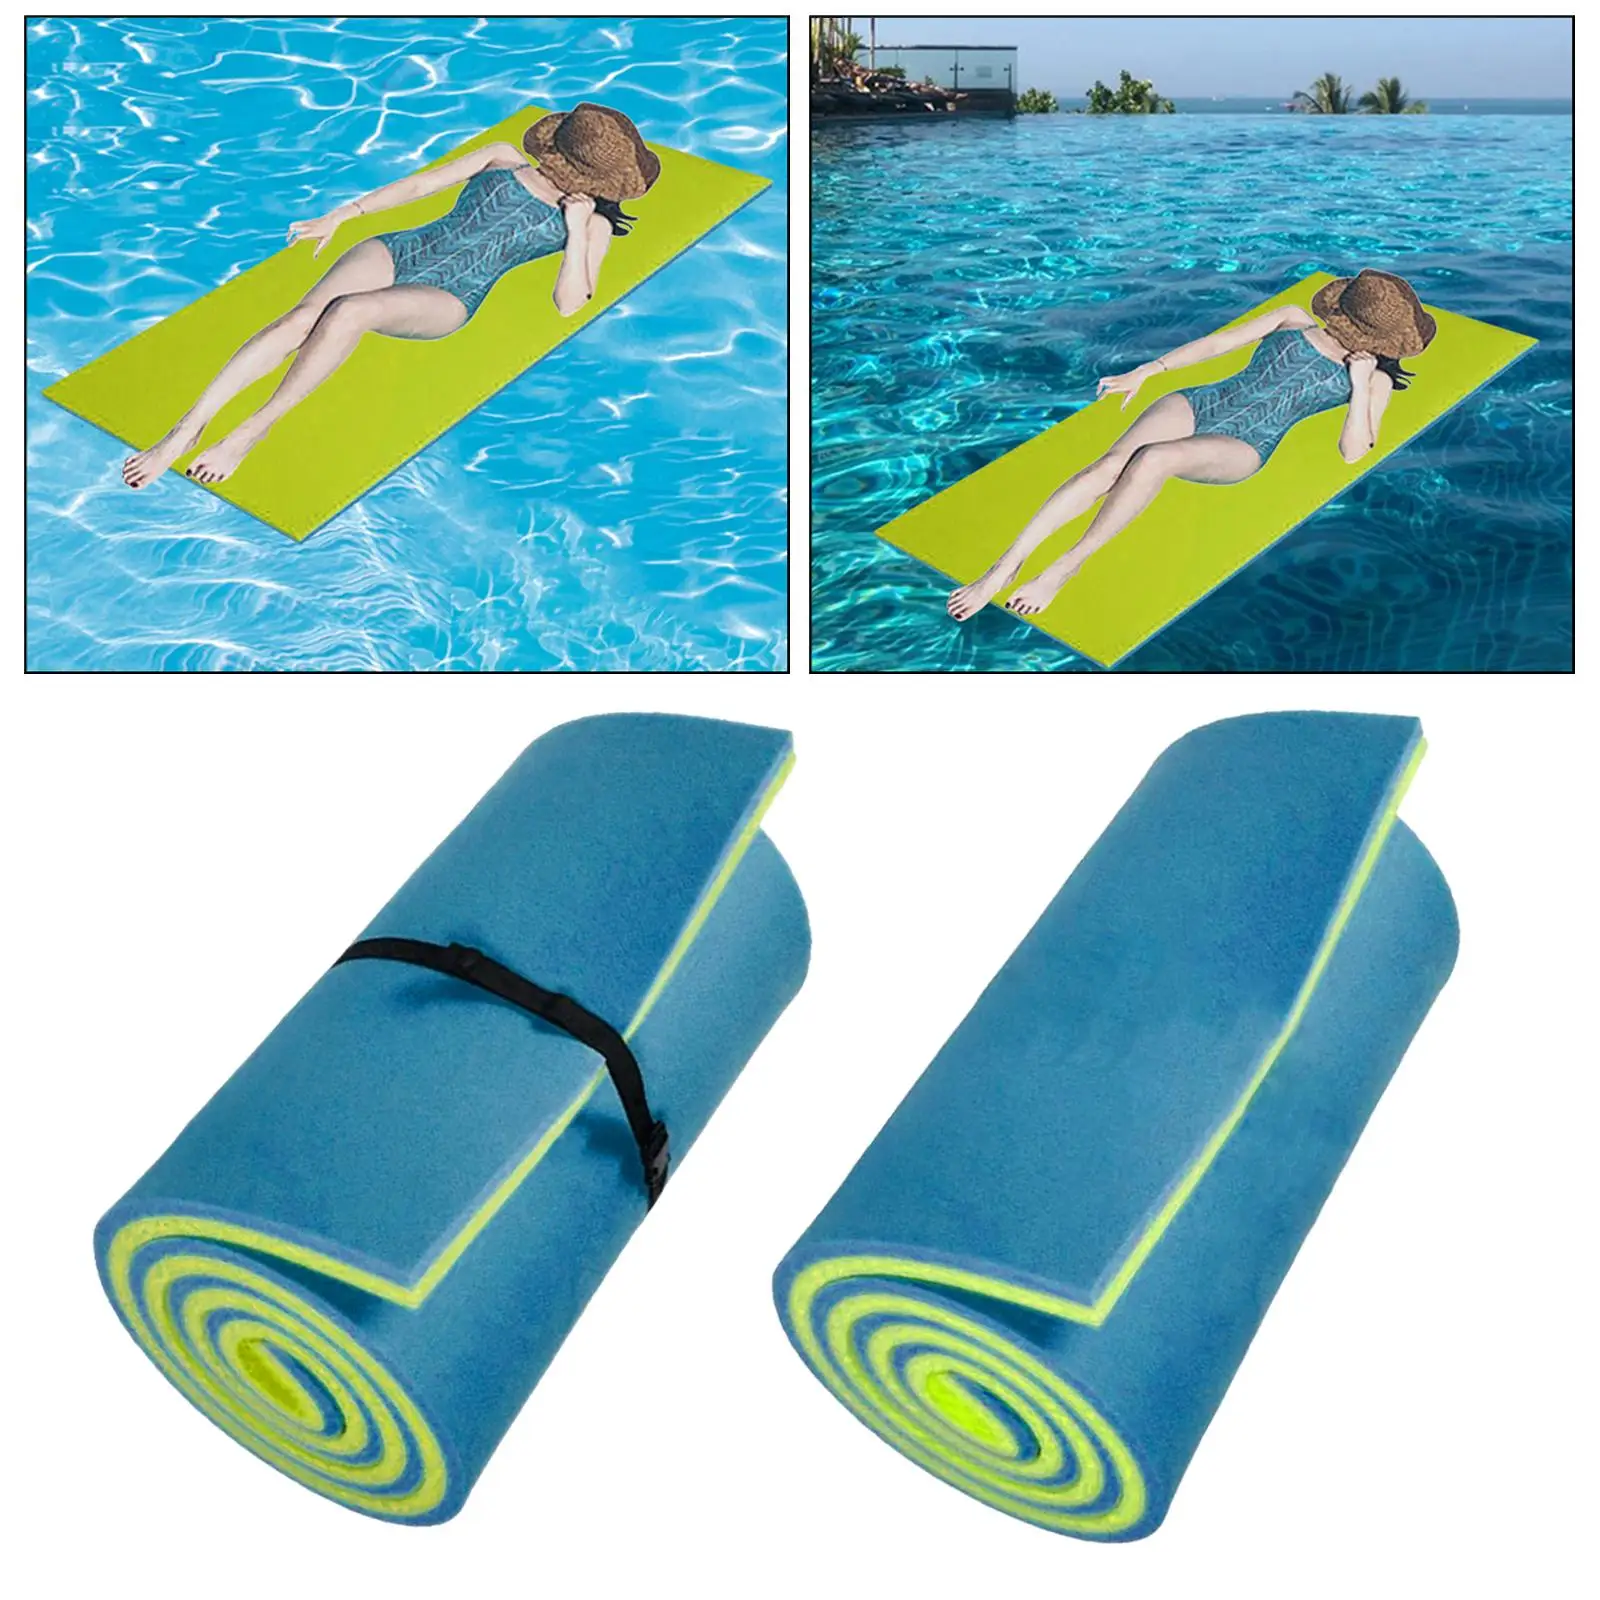 Water Float Mat Floating Raft for Pool Roll up Mattress Portable Pool for Boating Party Play